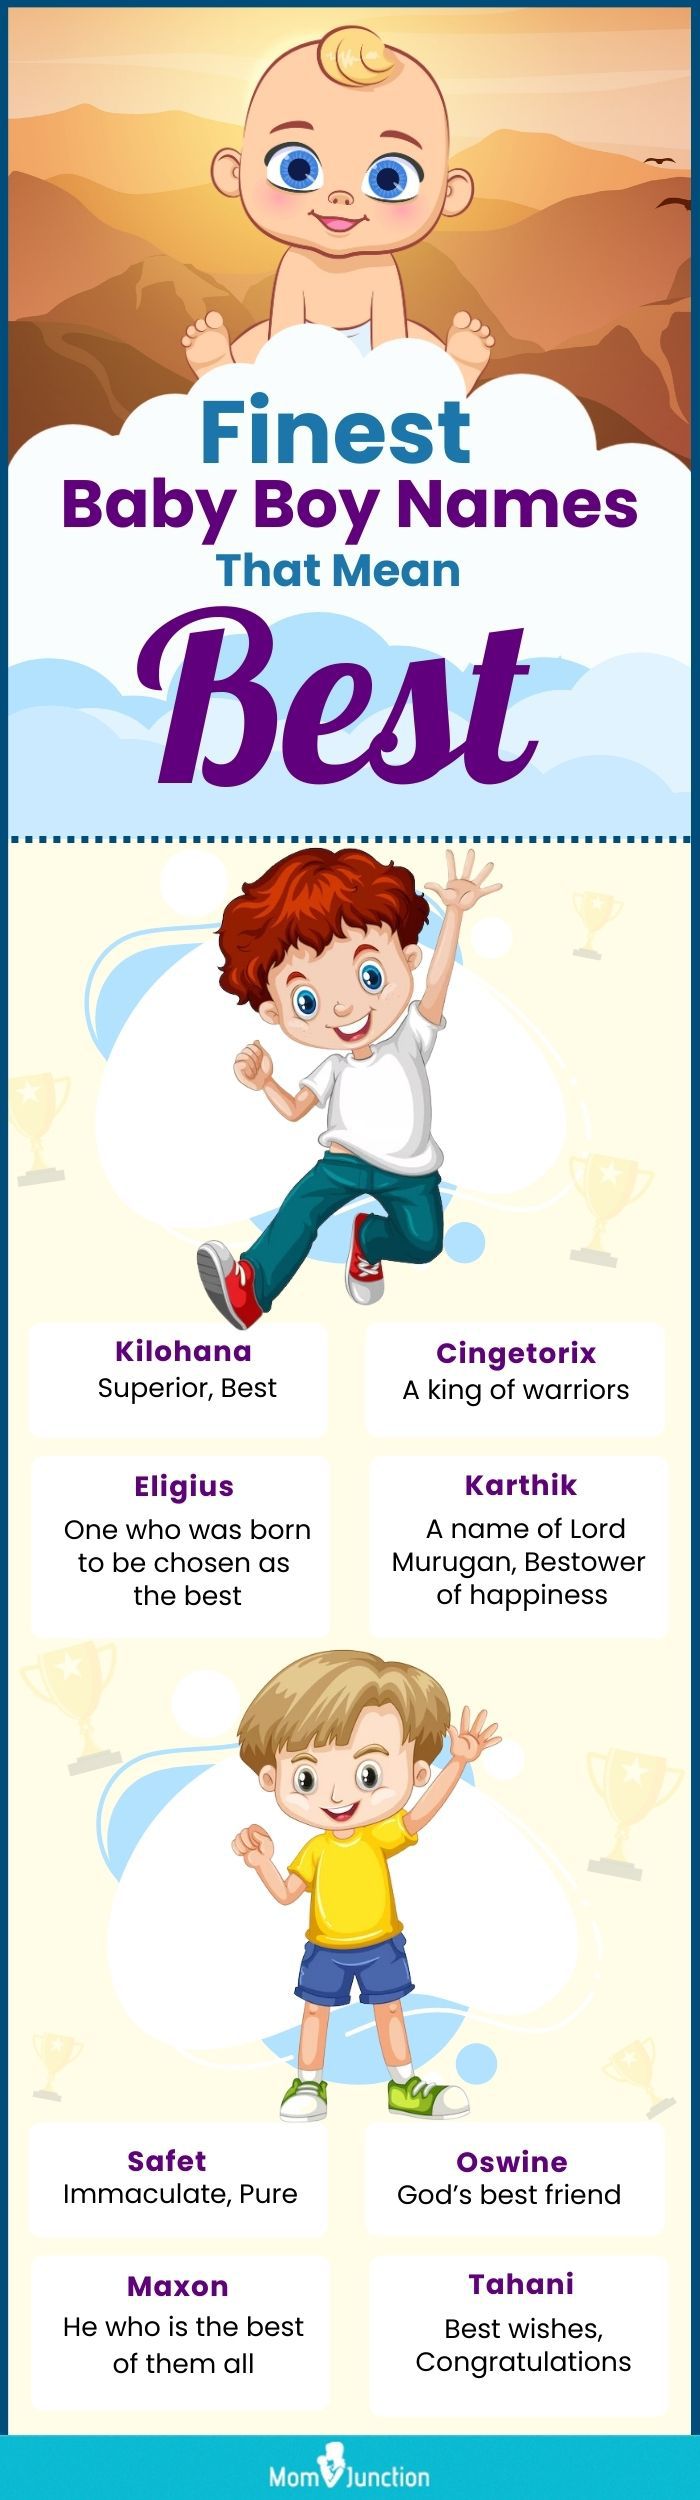 finest baby boy names that mean best (infographic)